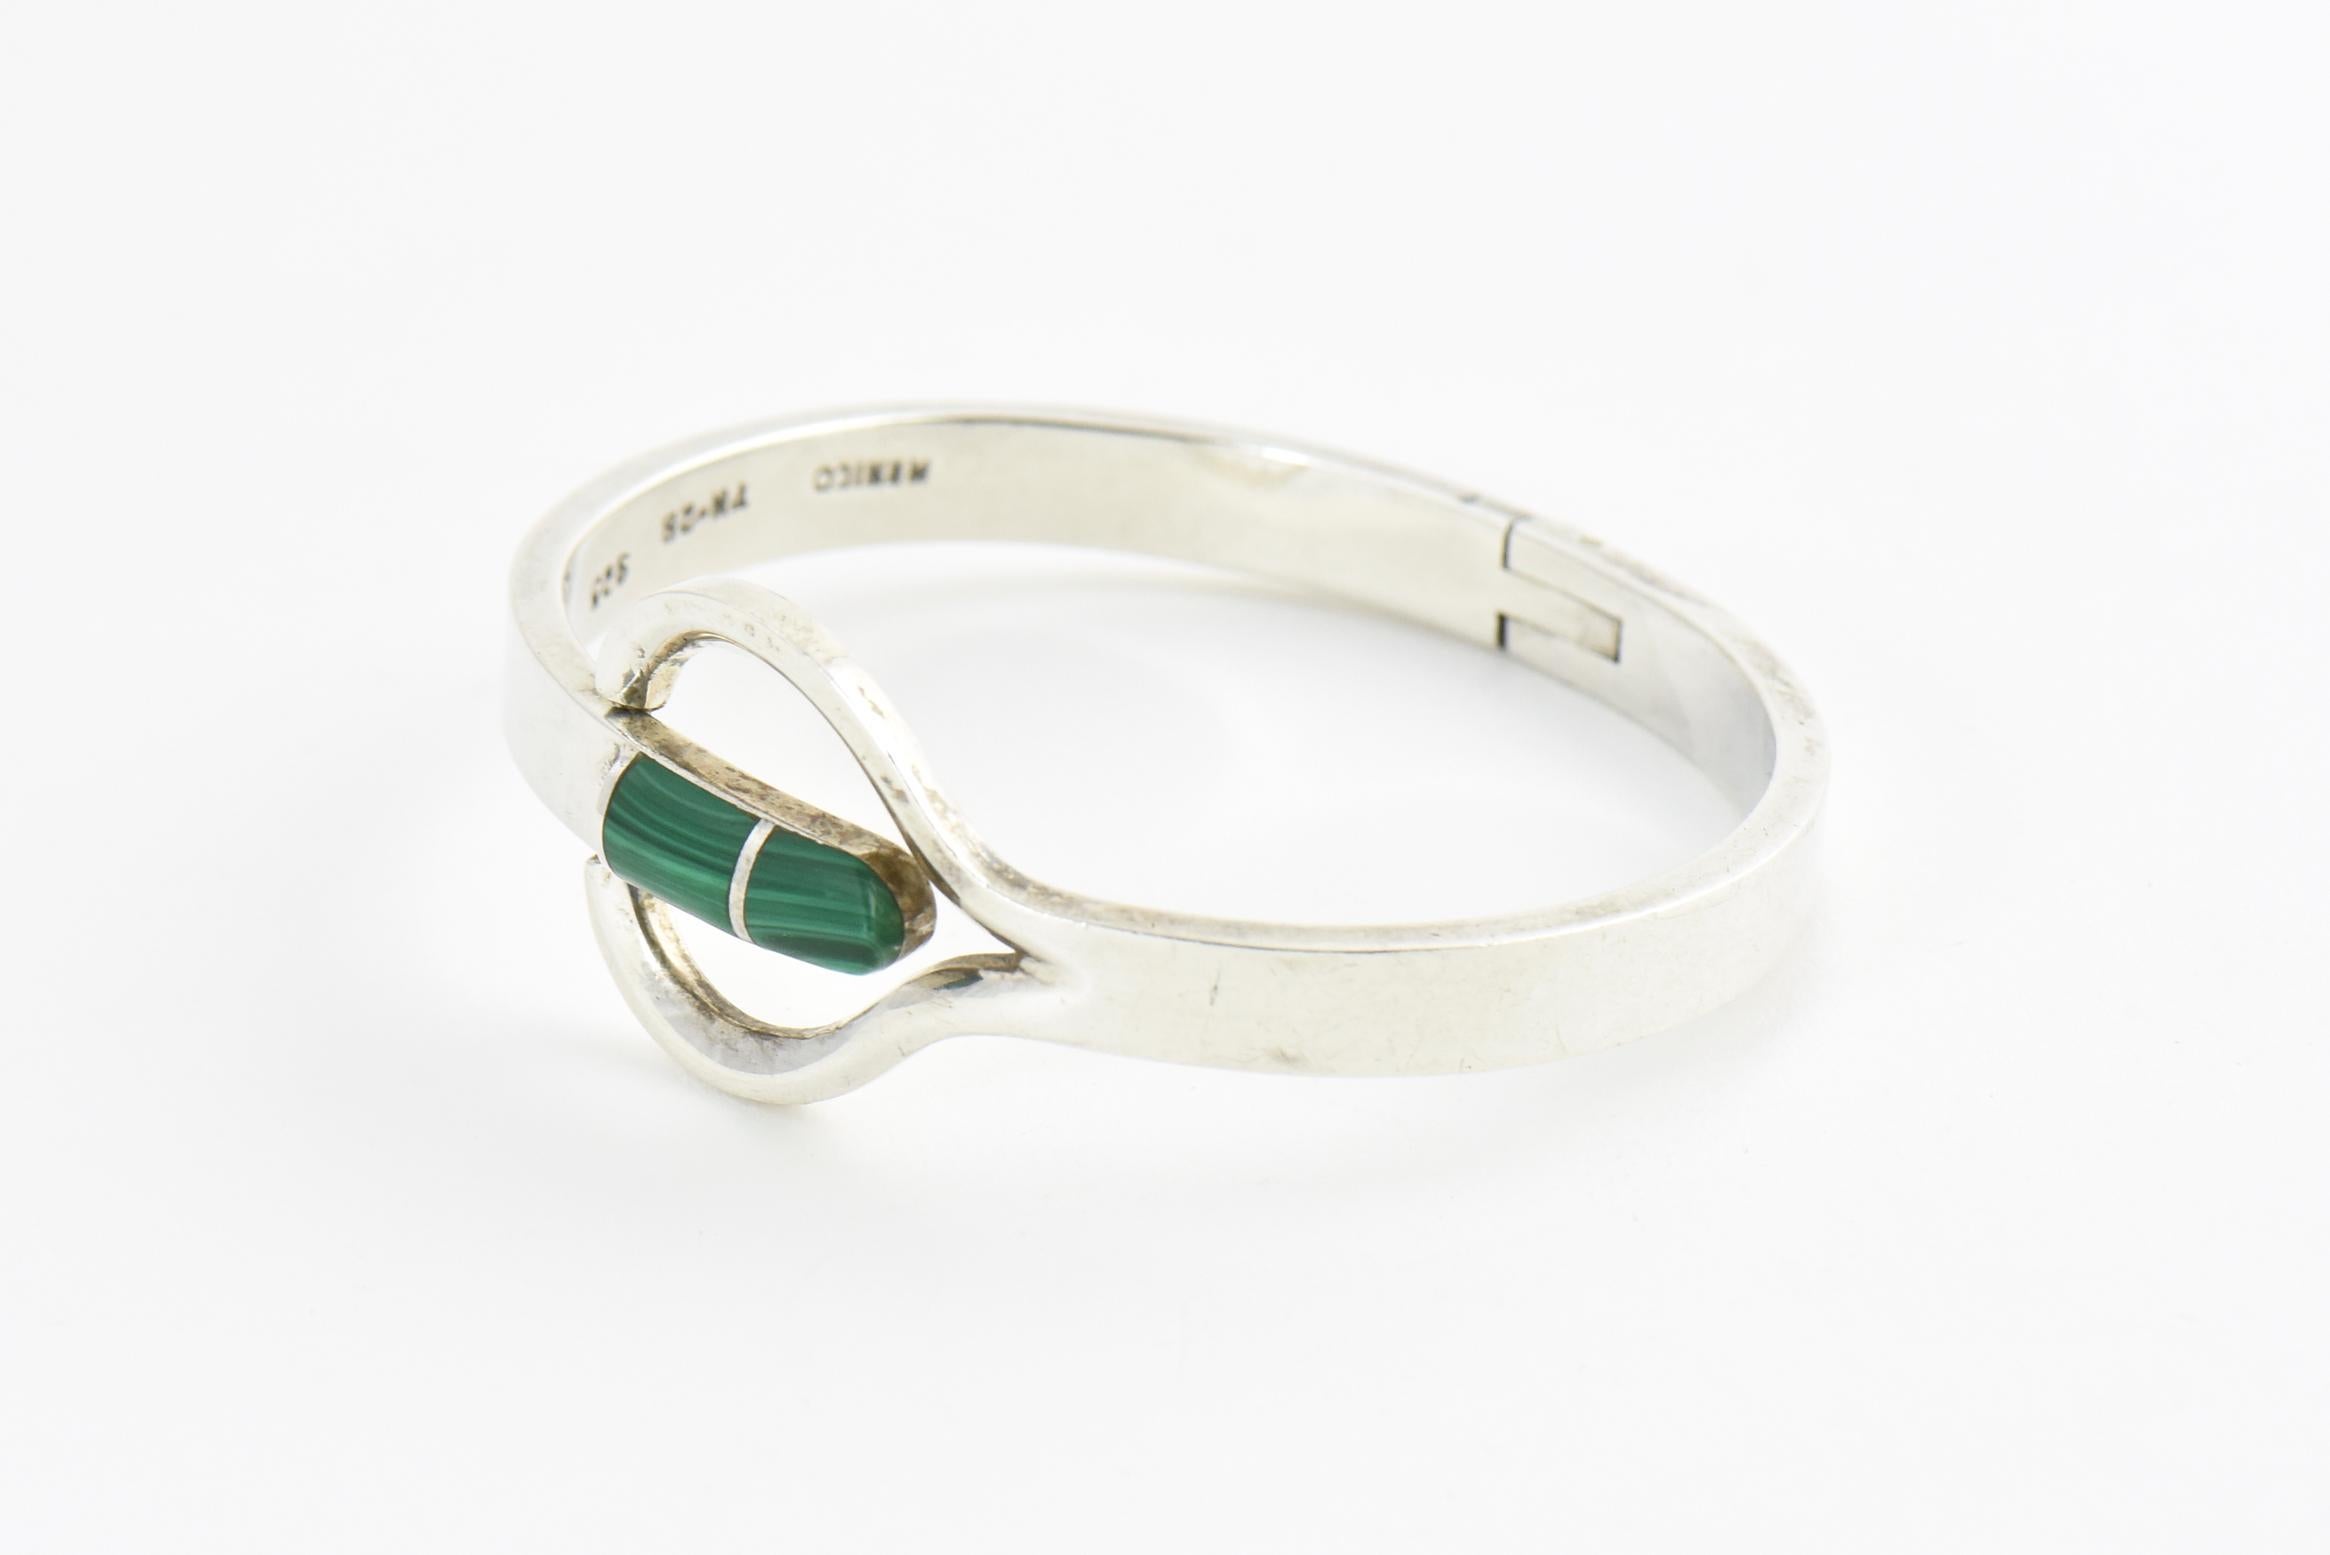 Vintage solid sterling silver bangle with malachite inlay from Taxco, Mexico. Interior, 6.5